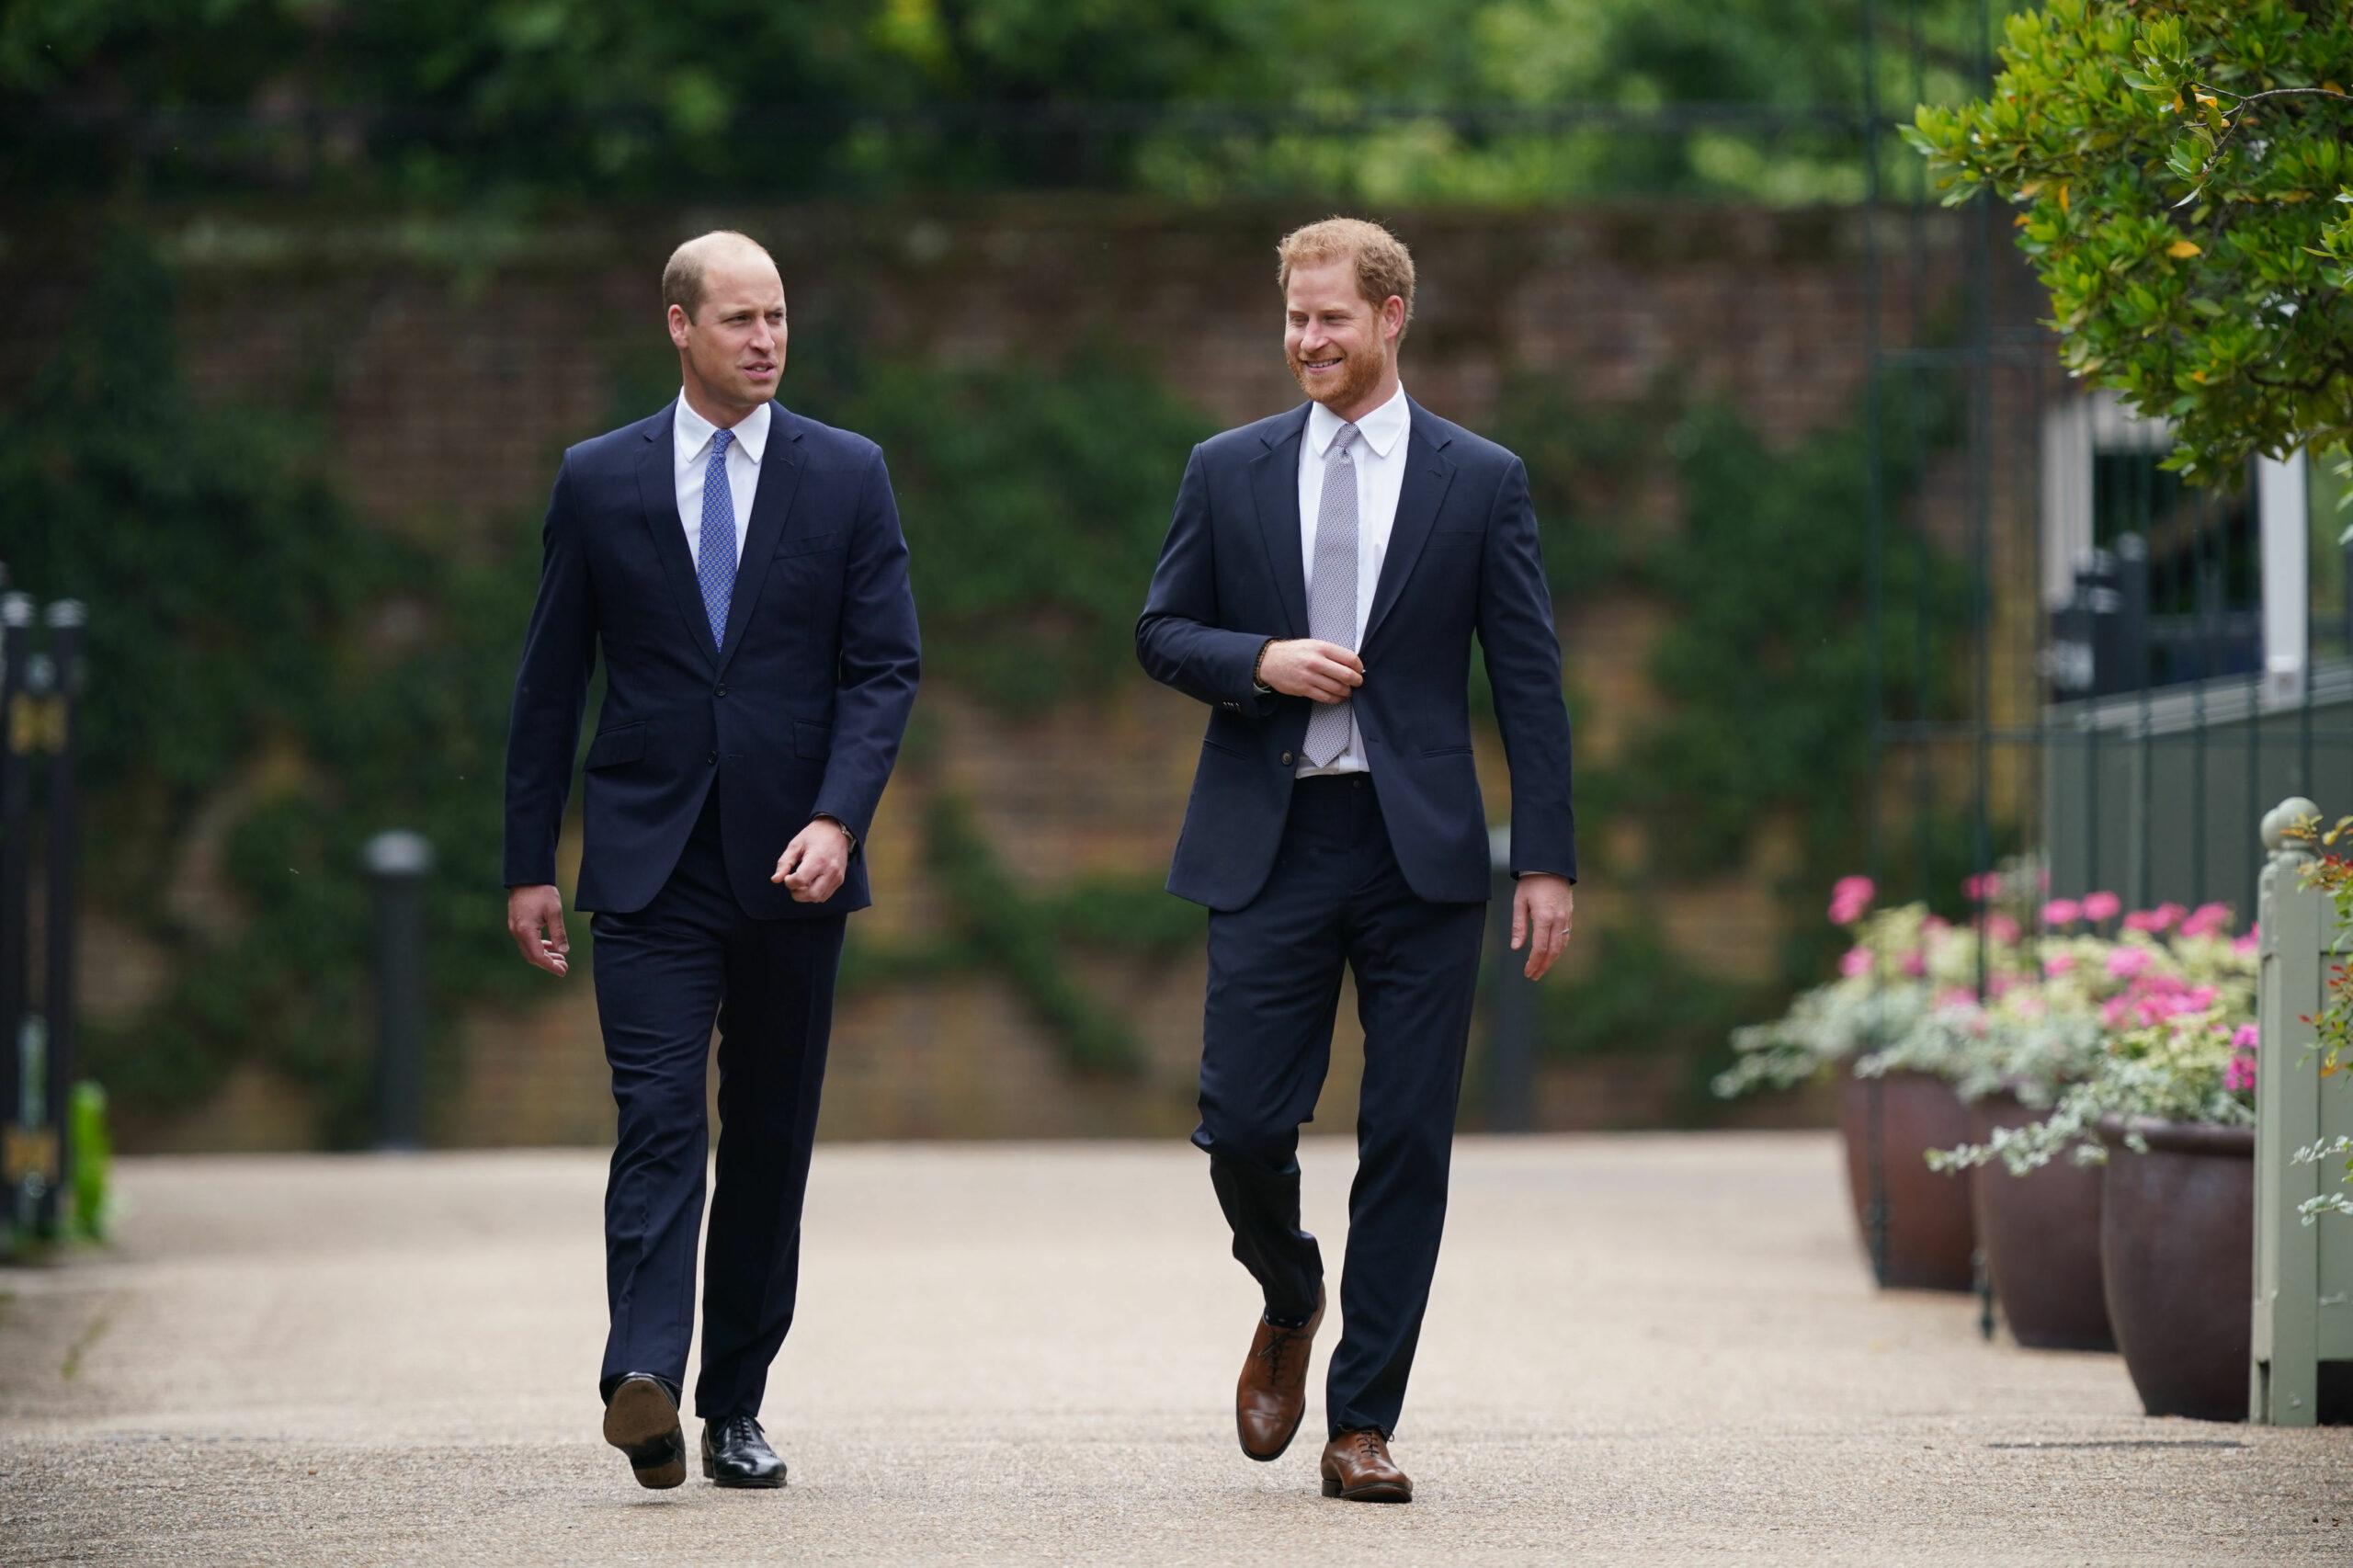 Prince Harry accuses William of physically attacking him in his book 